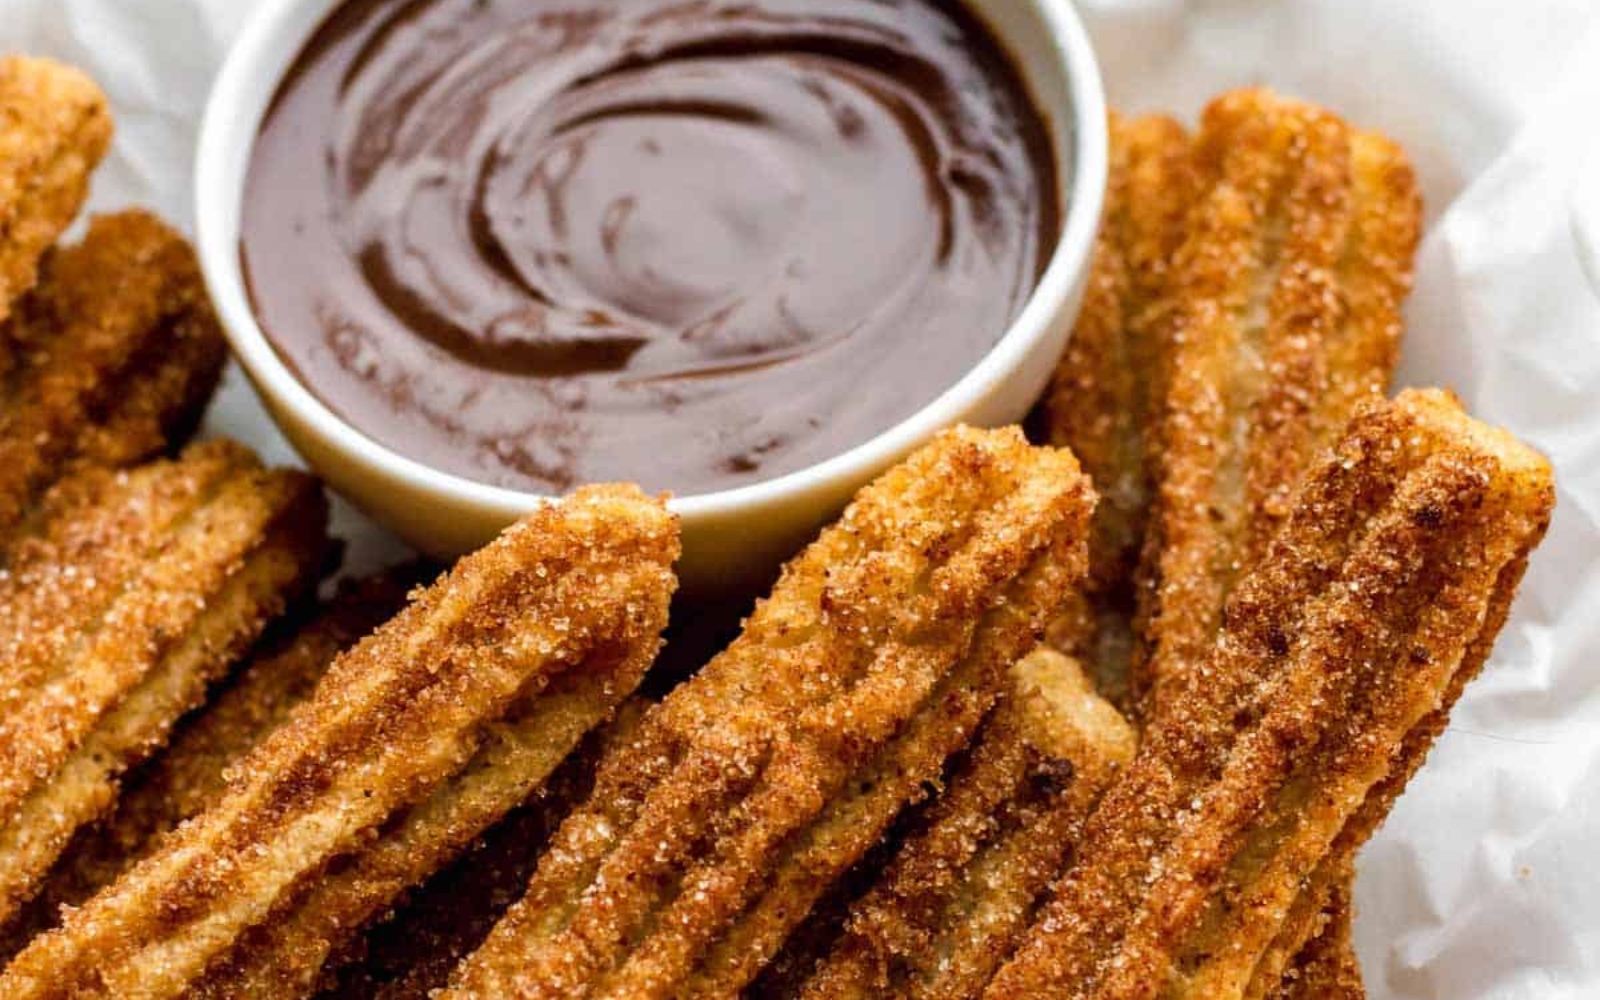 a plate of churros with chocolate sauce in a bowl